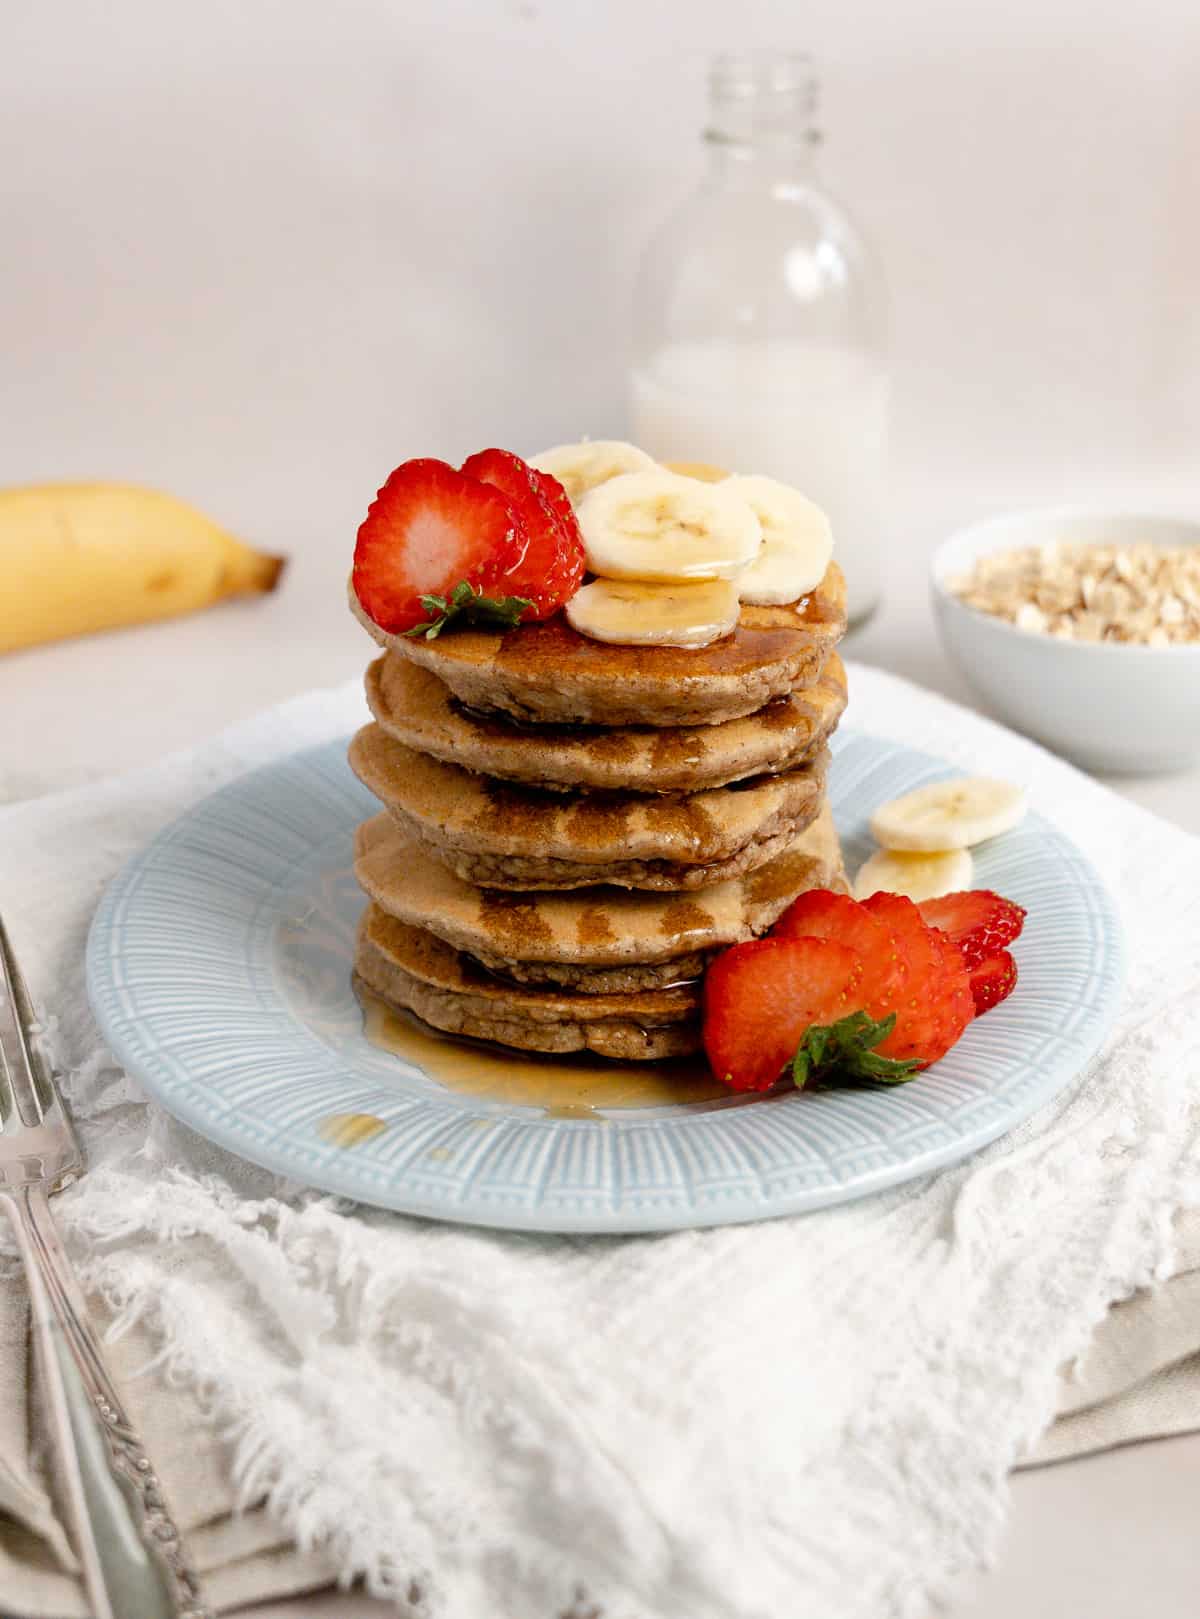 maple syrup soaked into a stack of pancakes with fruit on top and side